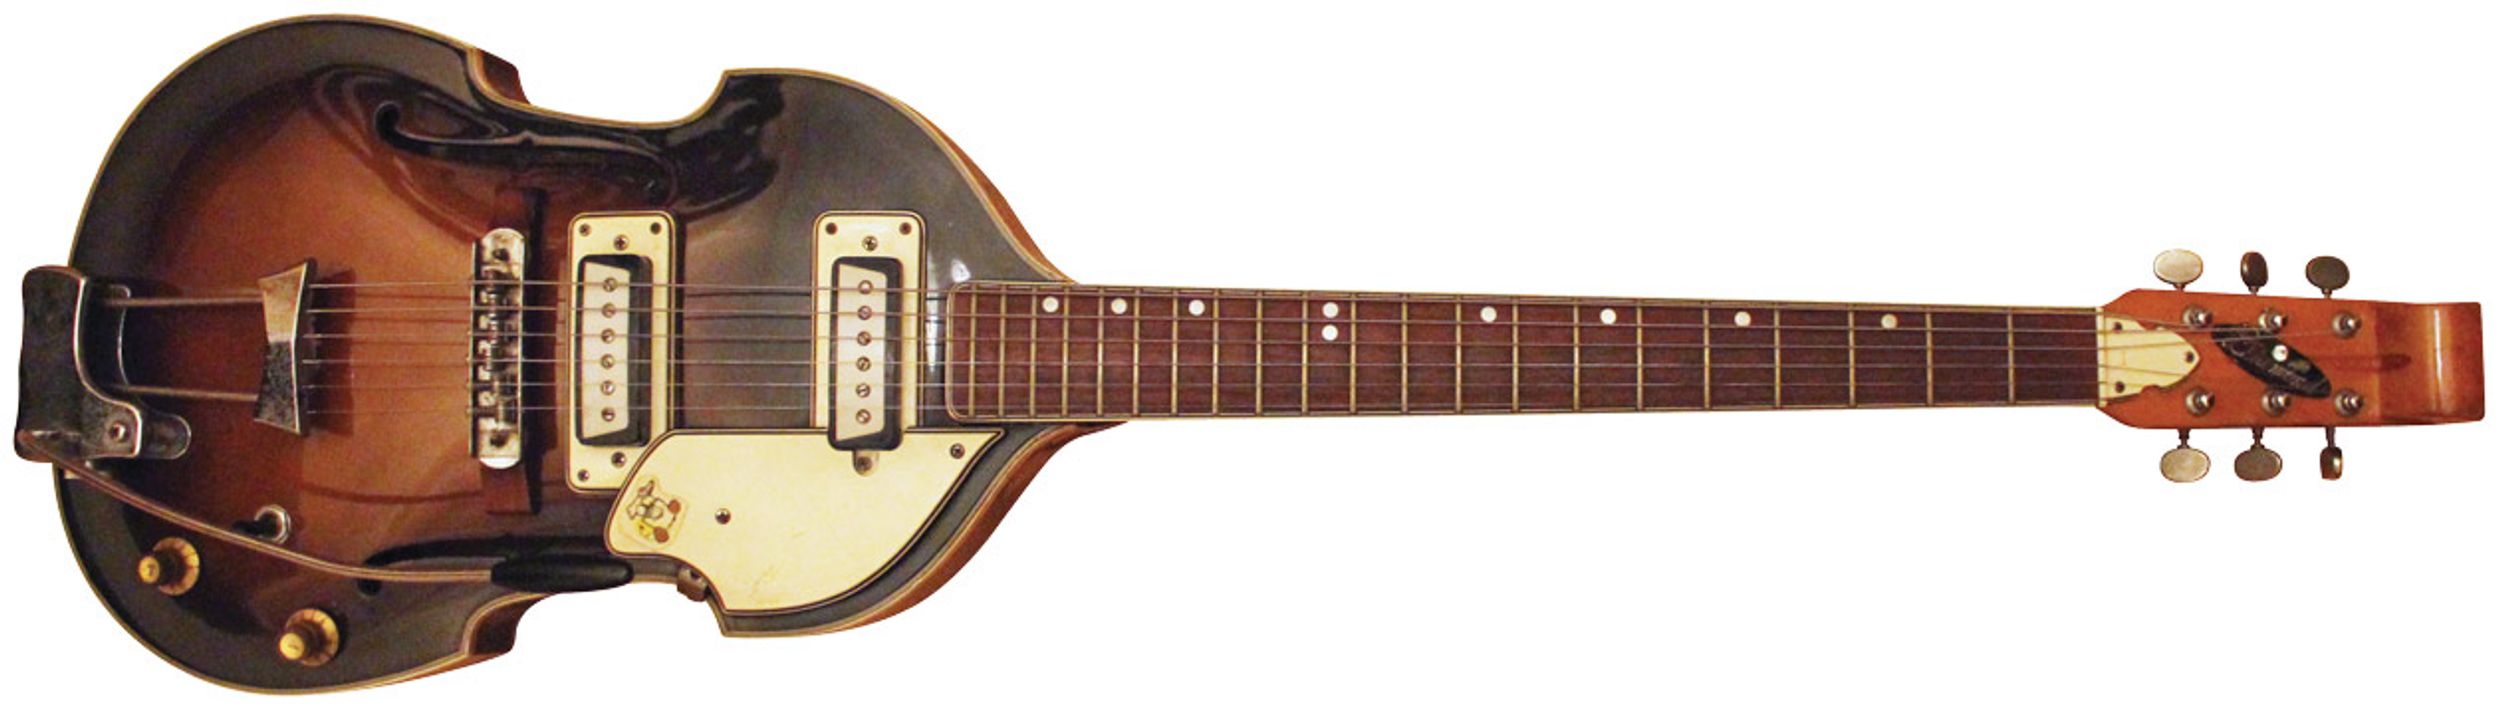 Wizard of Odd: The Incredible Tale of a Mid-’60s Aria Diamond 1402T